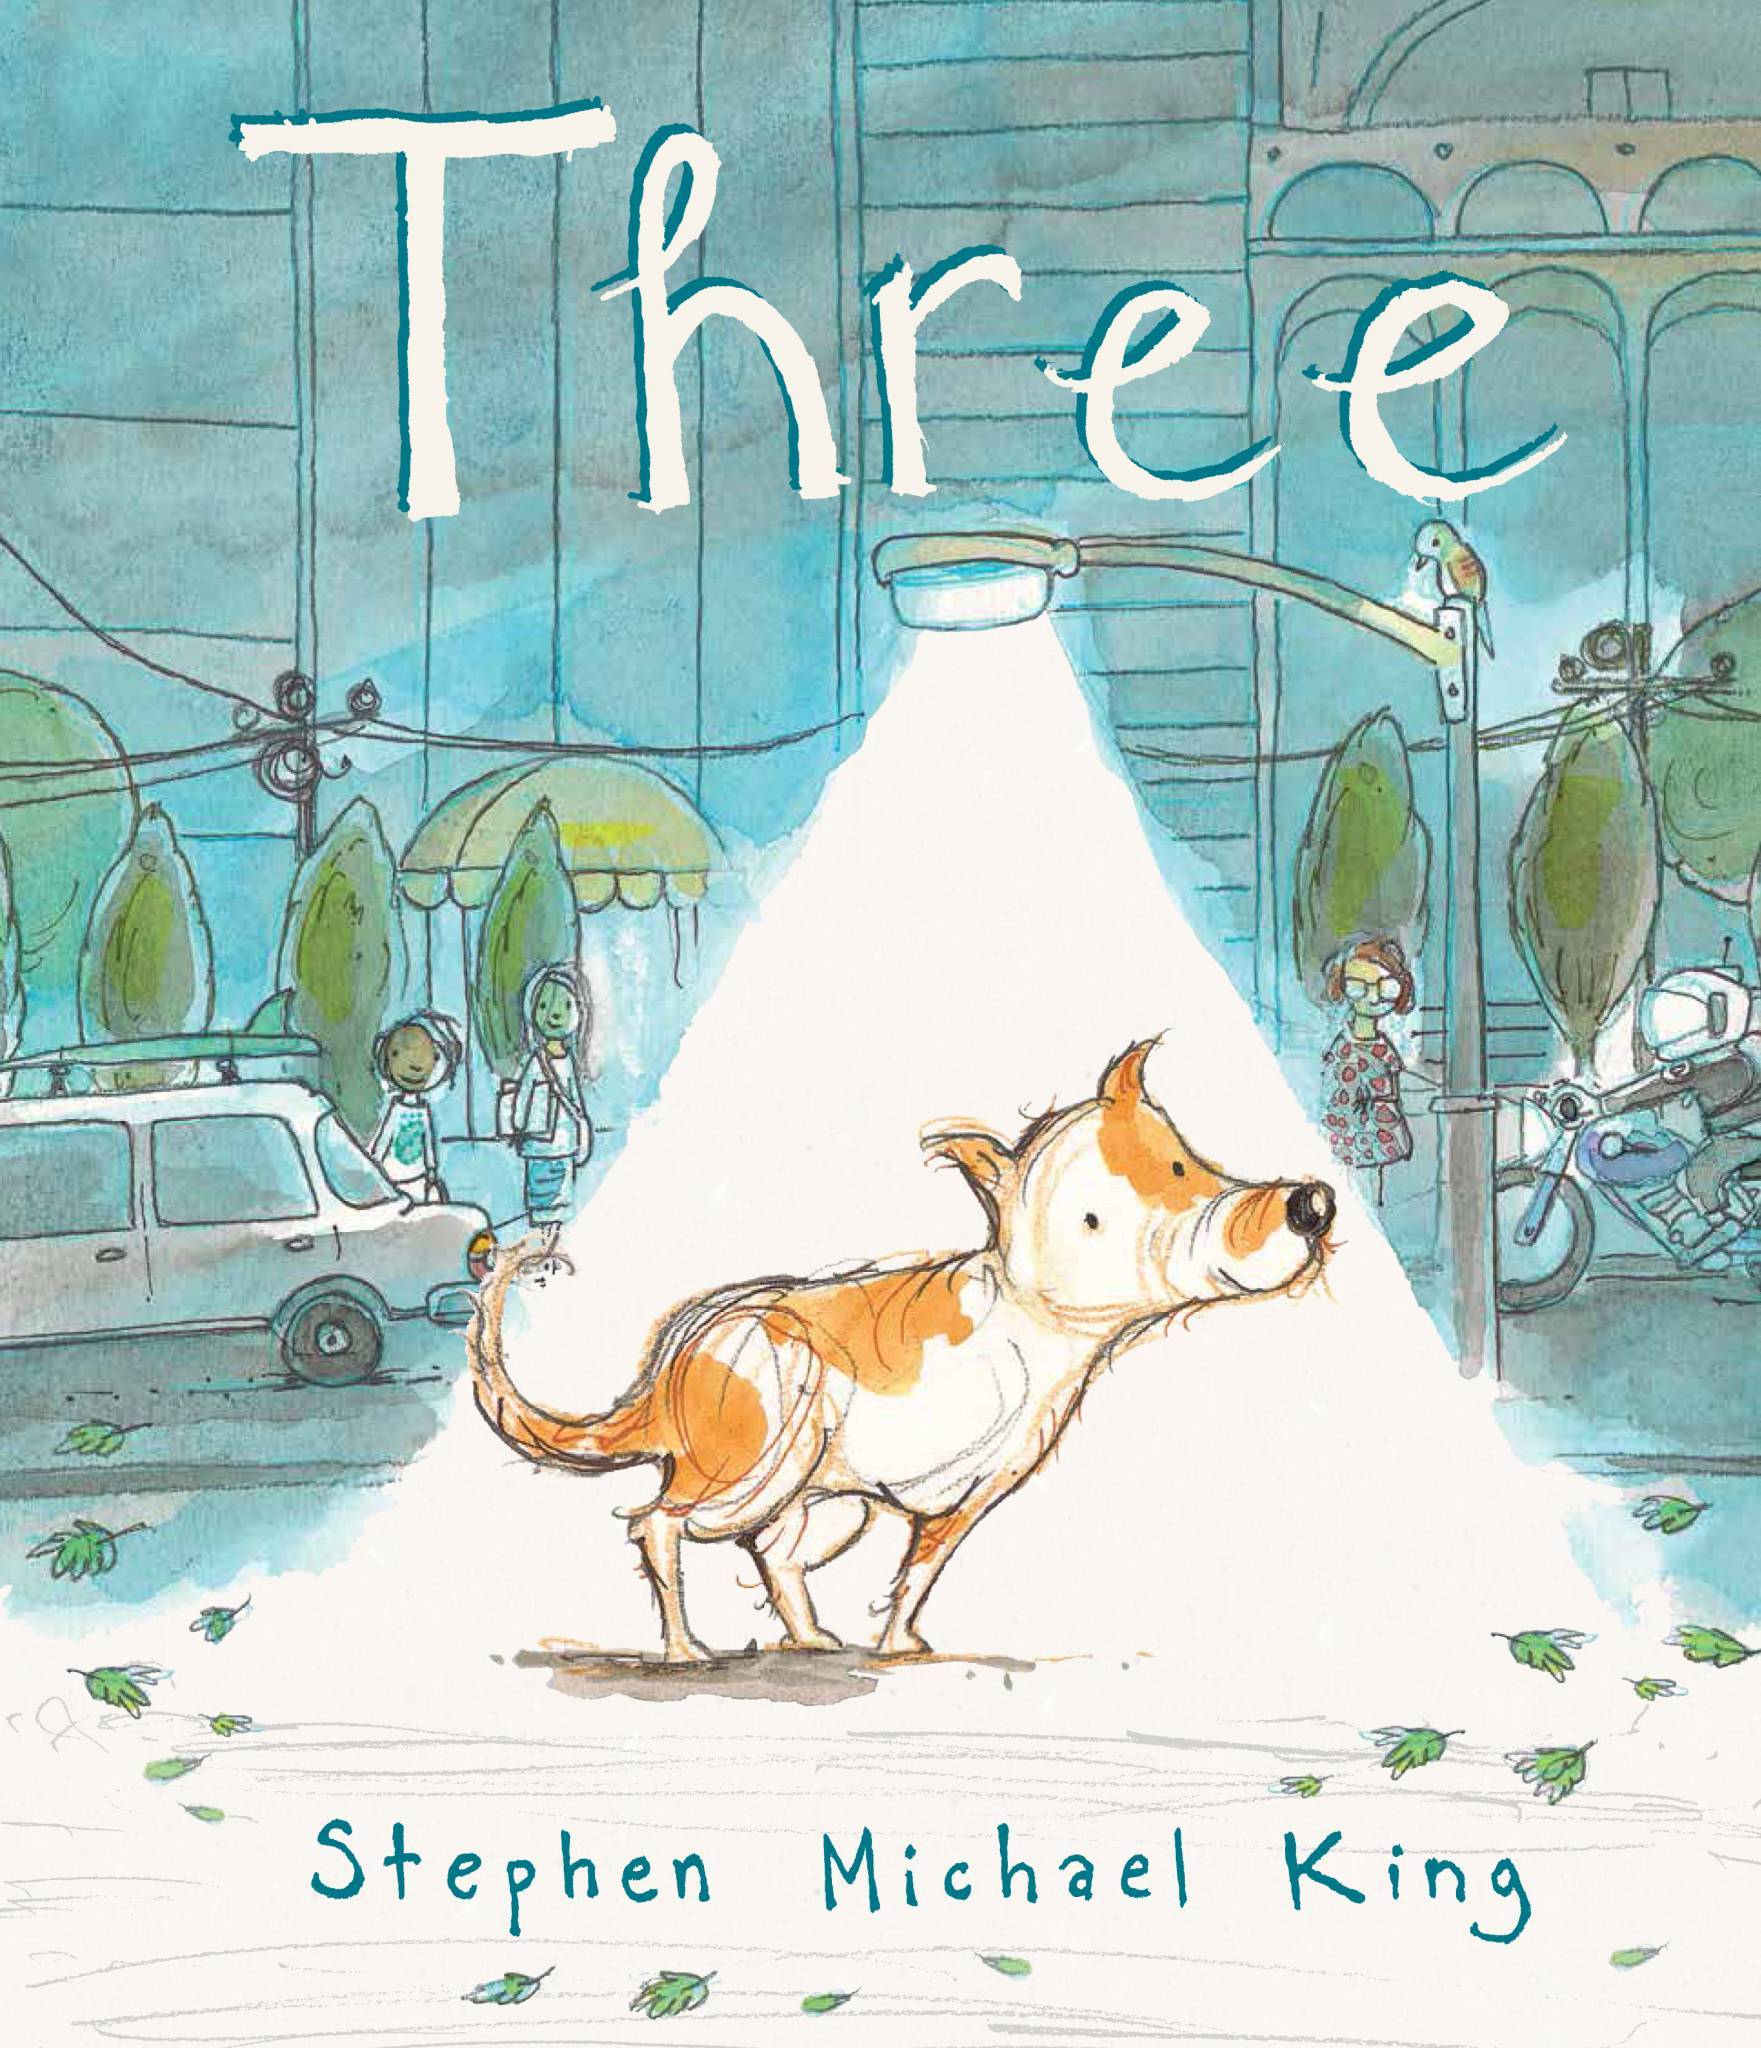 Cover image of the children's picture book Three. an orange and white dog missuing his front right leg stands under the light of a street lamp